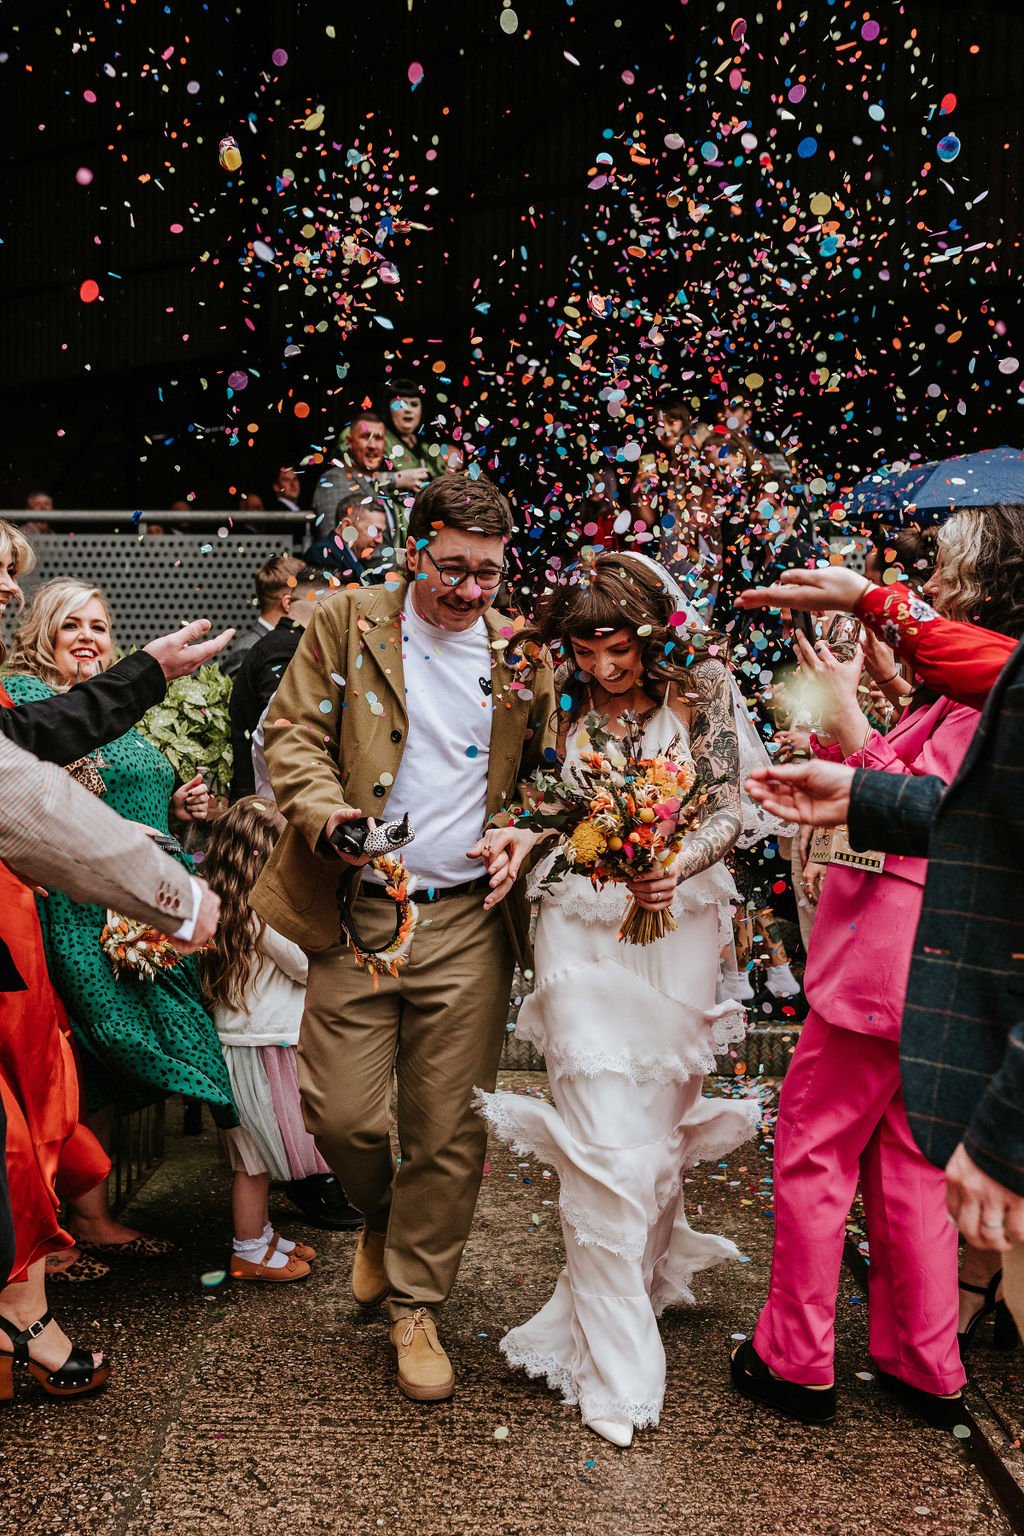  Photographer Credit: Maddy Farris  Outside the beautiful Victoria Warehouse in the heart of Manchester city centre the bride and groom are walking through a shower of bright confetti which is being thrown by their wedding guests who are lining the p